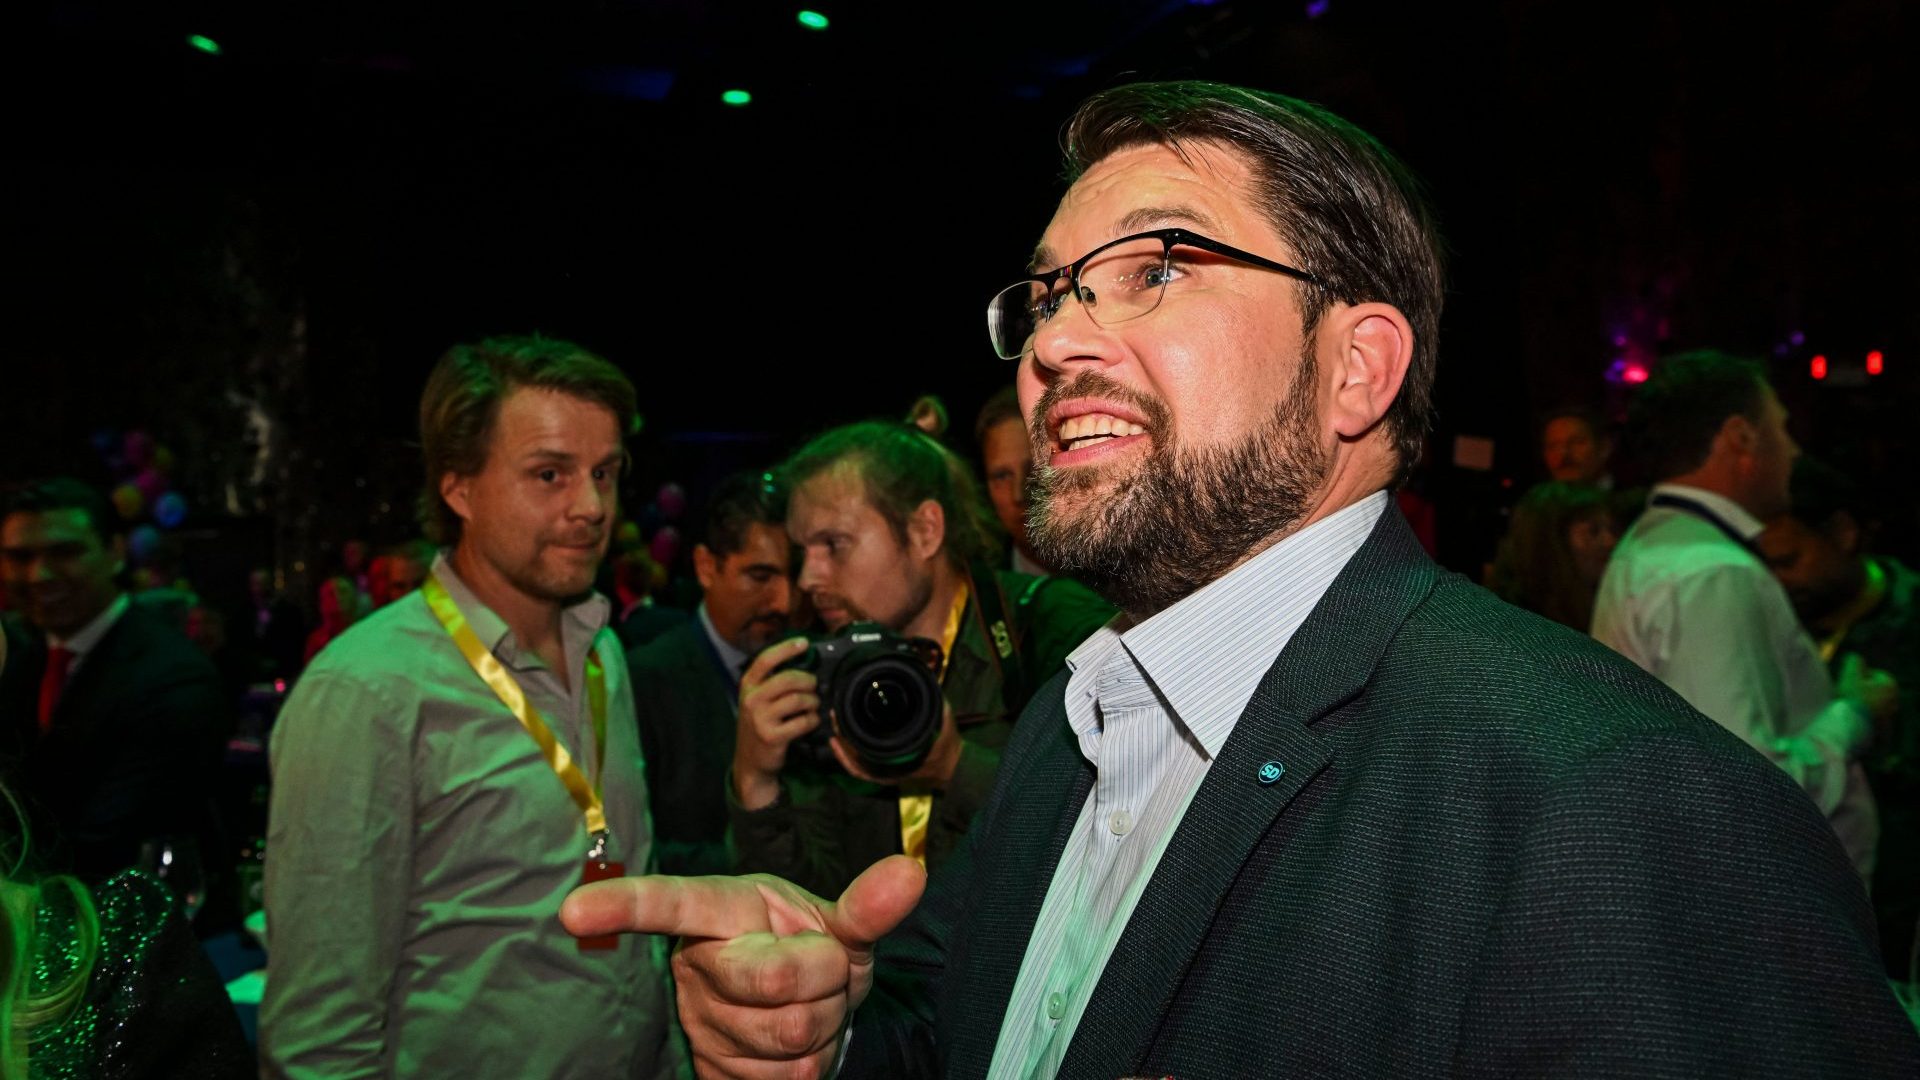 The leader of the Sweden Democrats Jimmie Akesson celebrates at the party's election watch in Nacka, near Stockholm late Sunday evening on September 11, 2022. Photo: JONATHAN NACKSTRAND/AFP via Getty Images